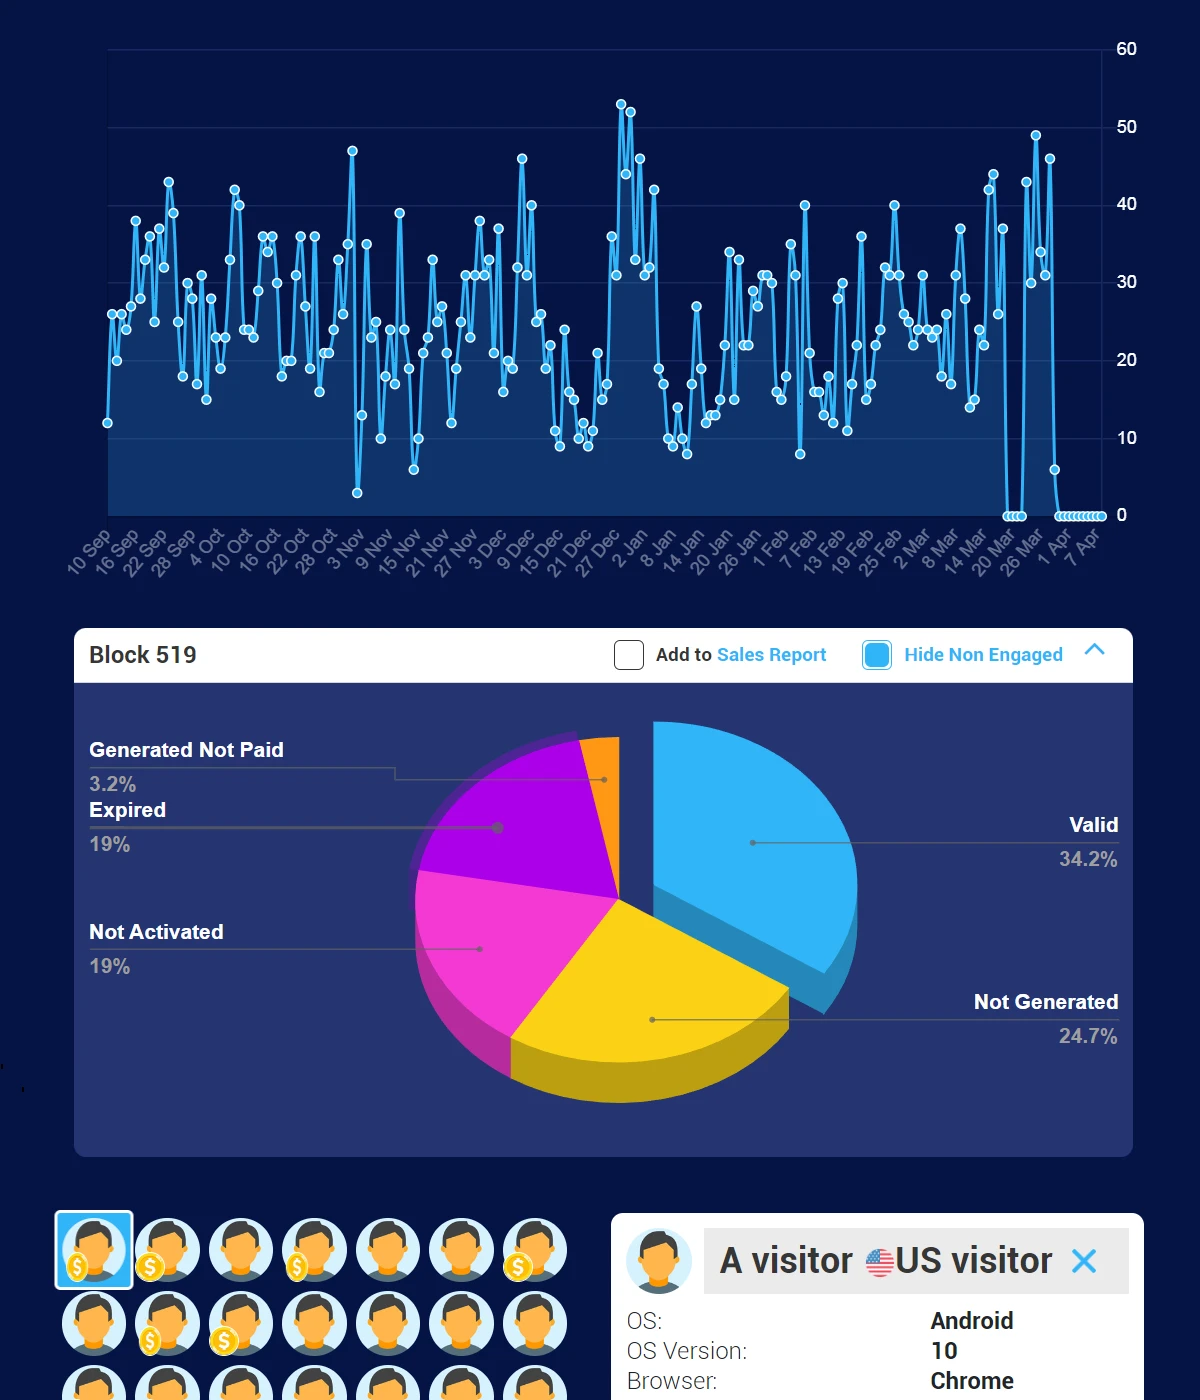 User interface showing visual analyses of visitor data with curve chart and pie chart for audience segmentation.